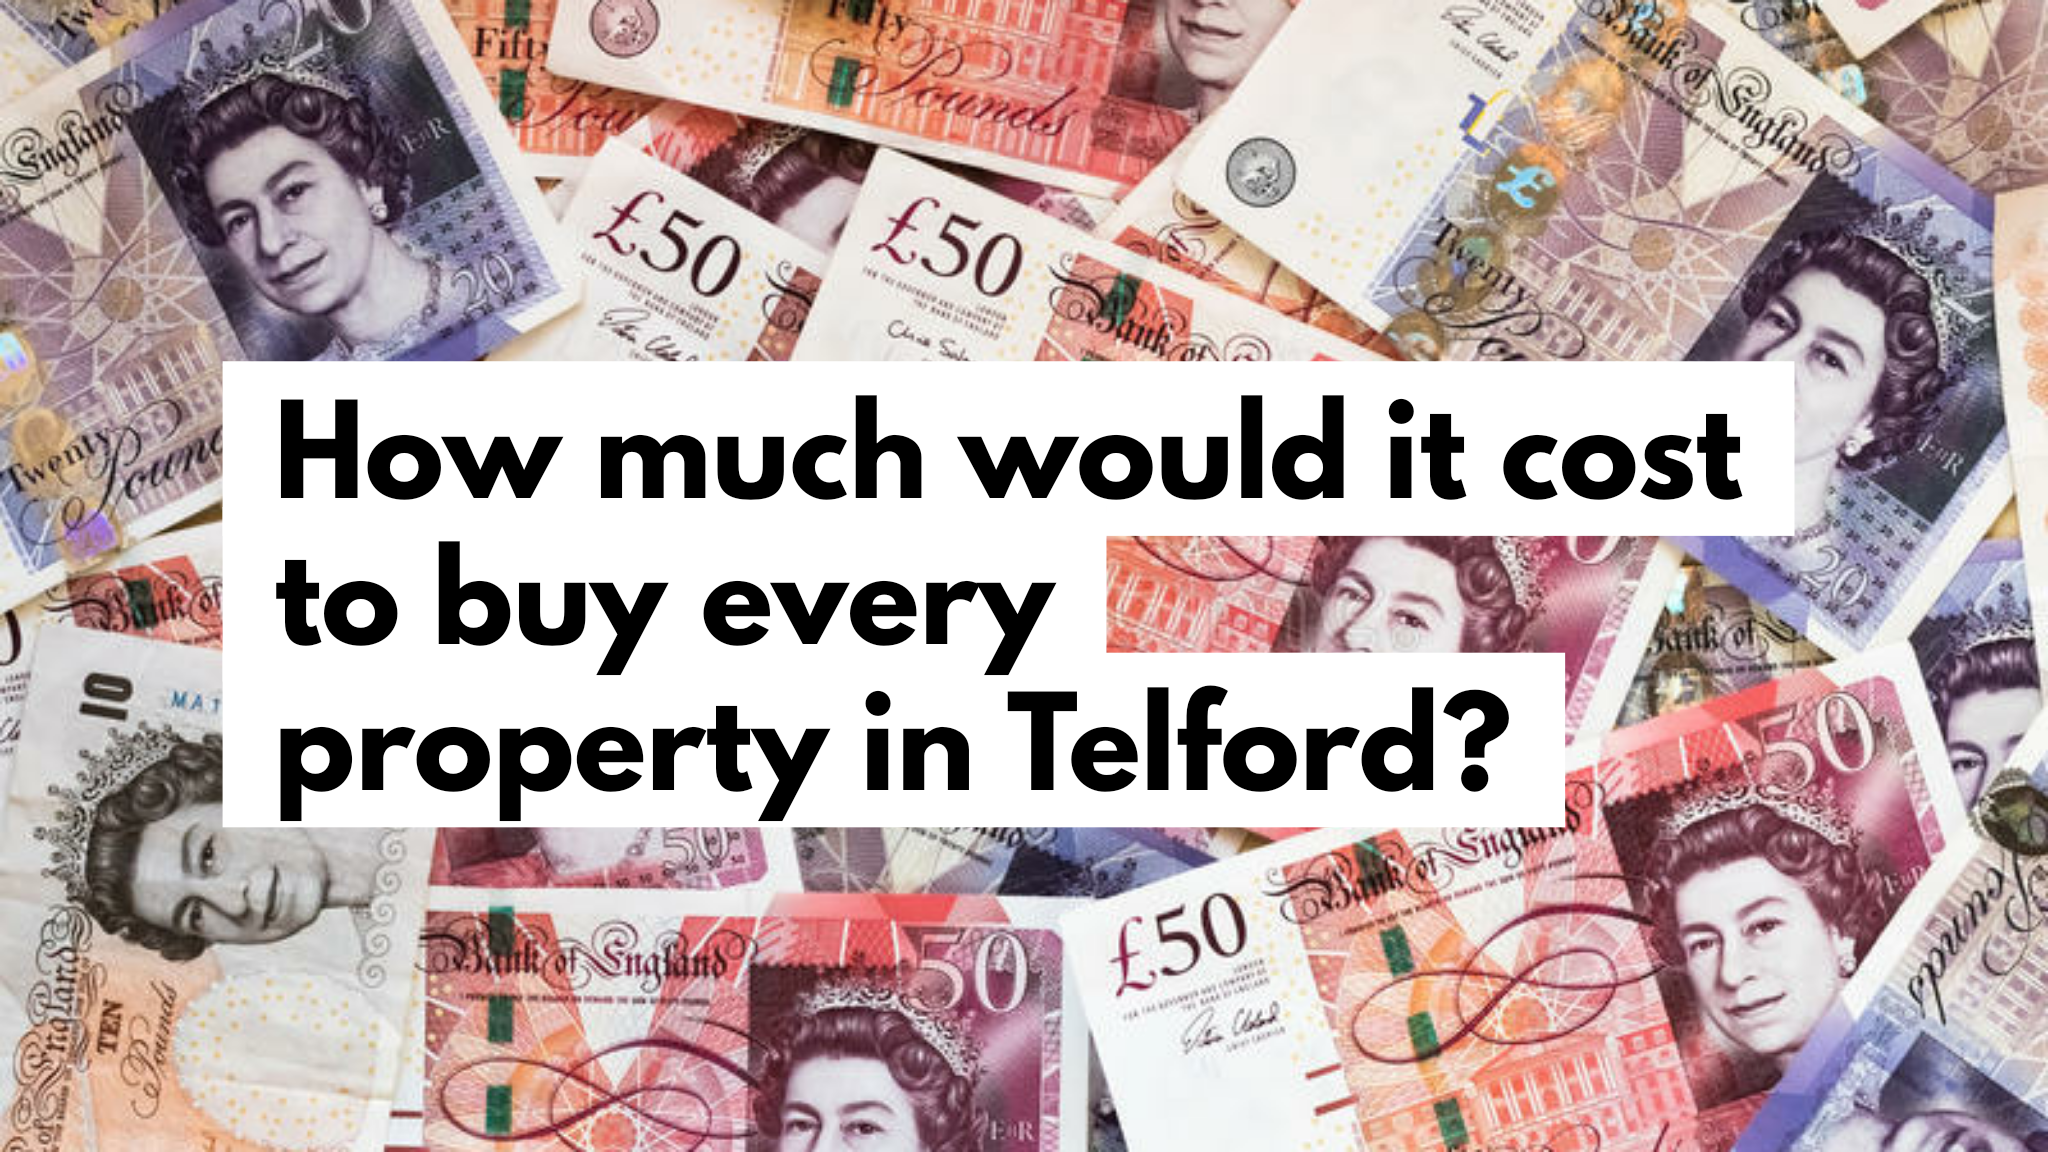 Telford Property Market Worth More Than Persimmon